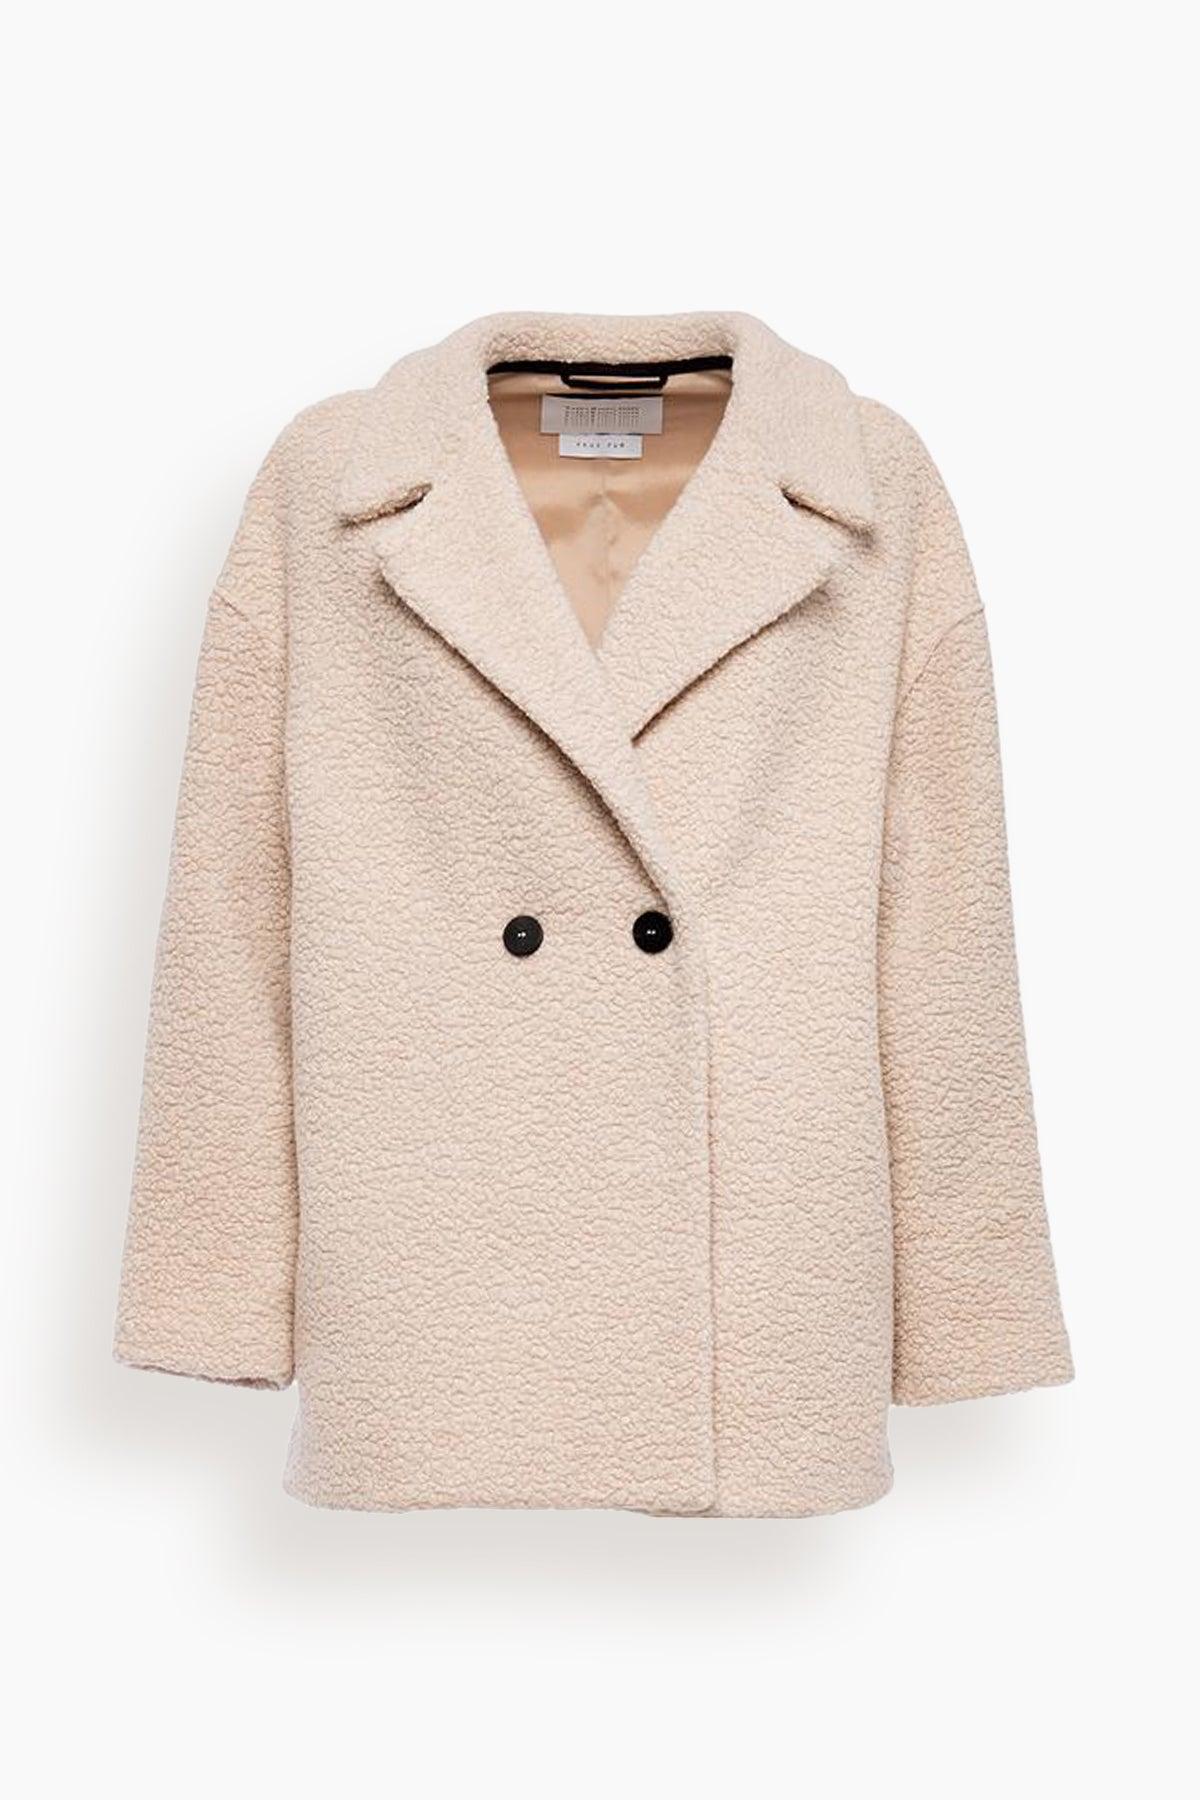 Harris Wharf London Dropped Shoulder Jacket in Natural | Lyst